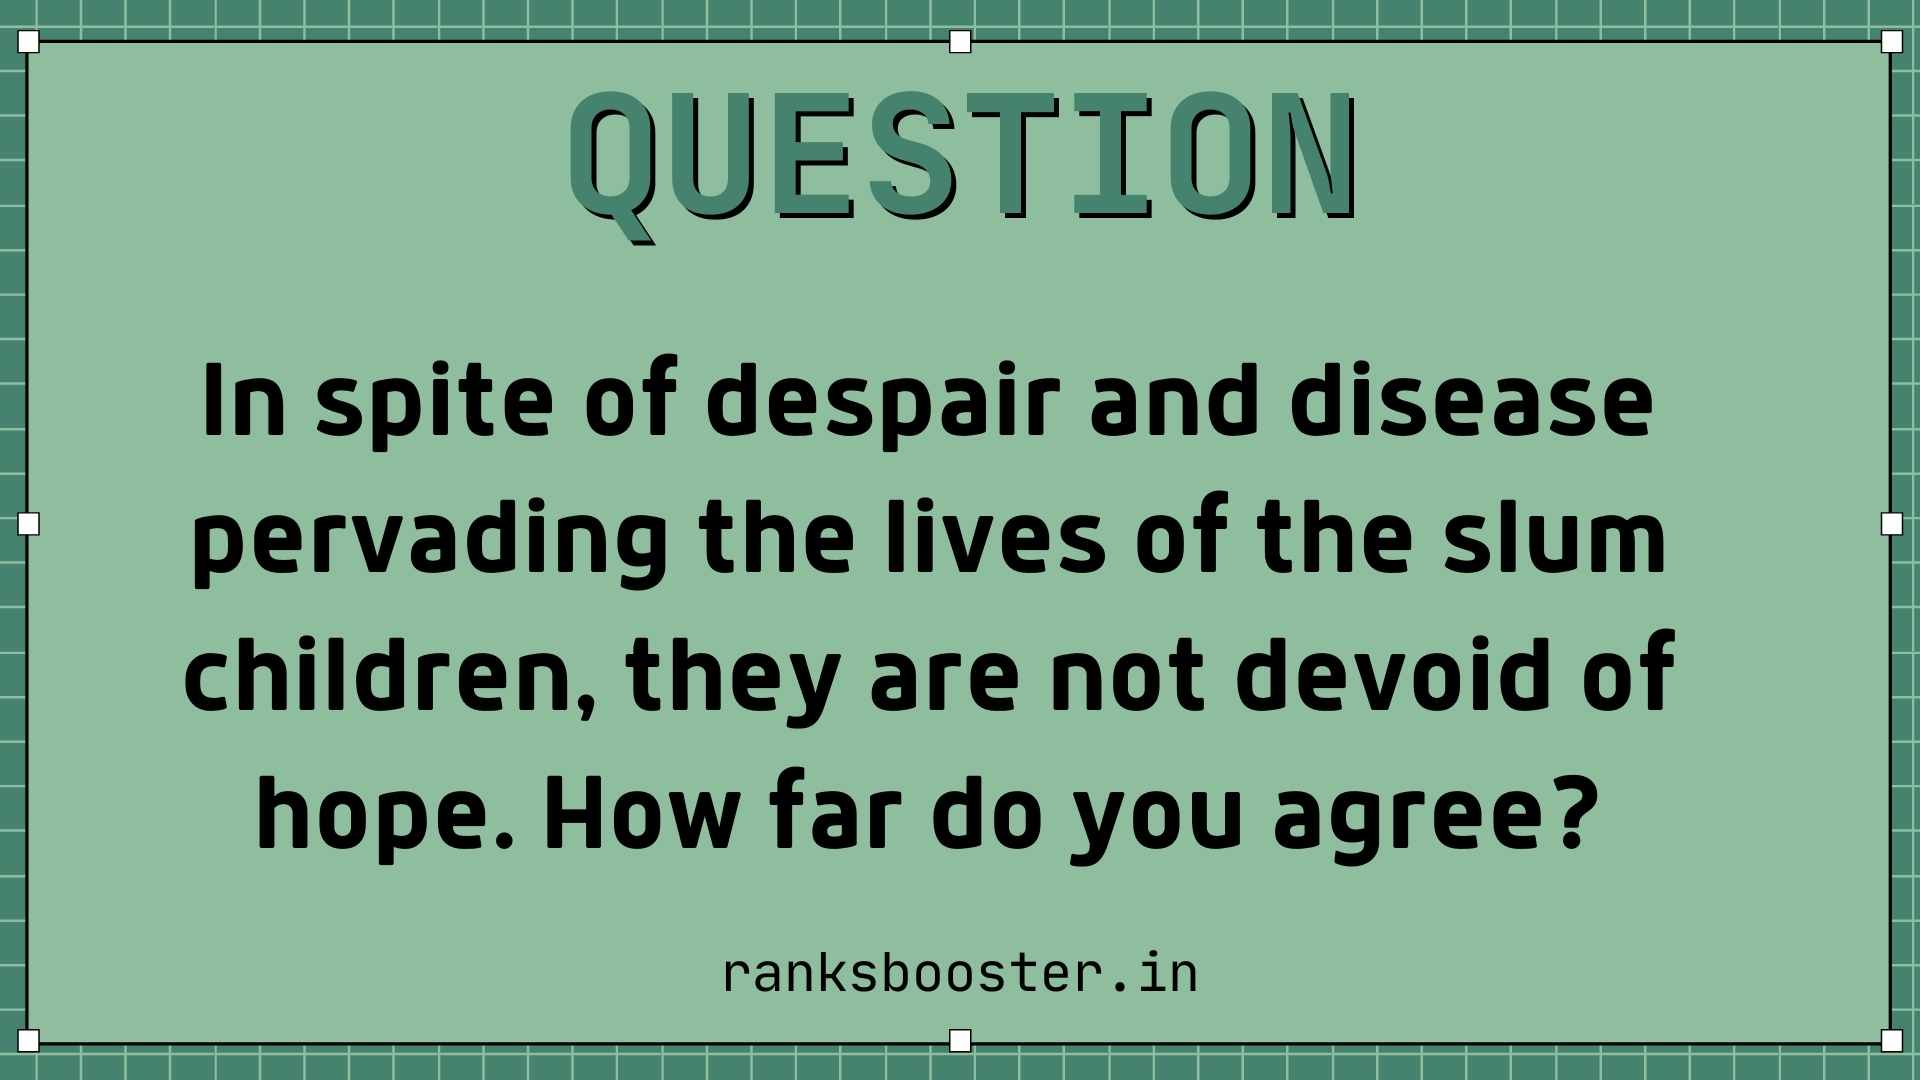 In spite of despair and disease pervading the lives of the slum children, they are not devoid of hope. How far do you agree?